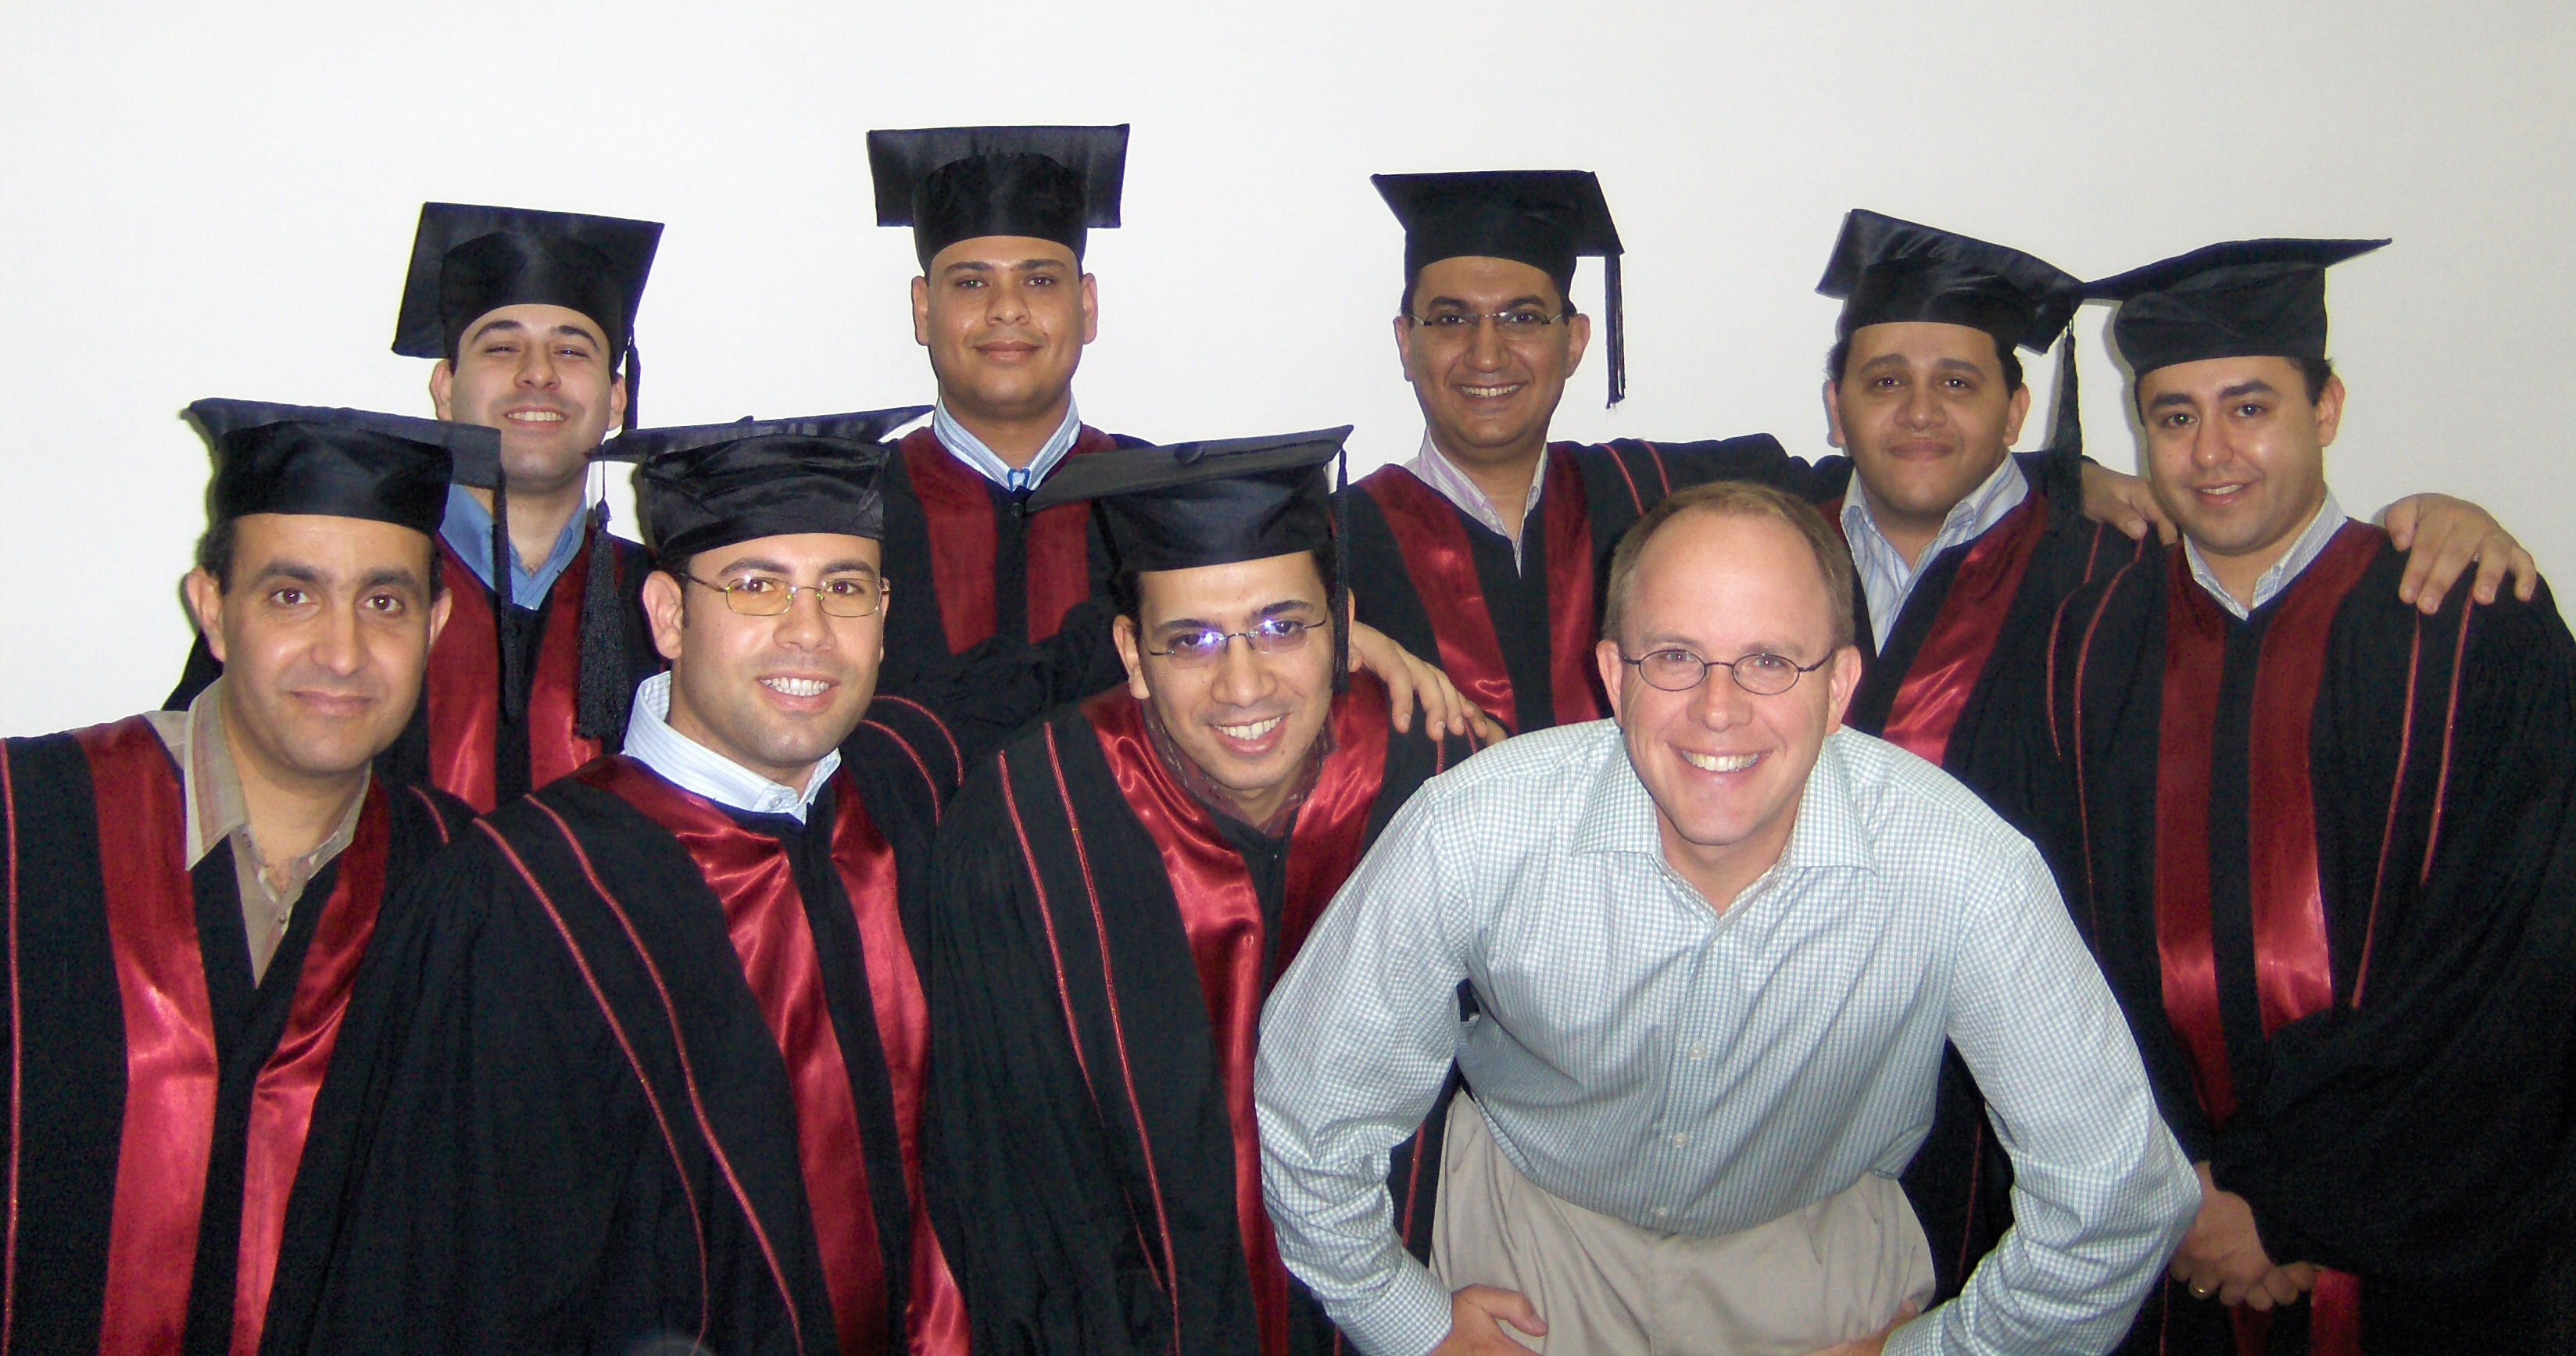 Dustin with graduates at ETSC in Cairo